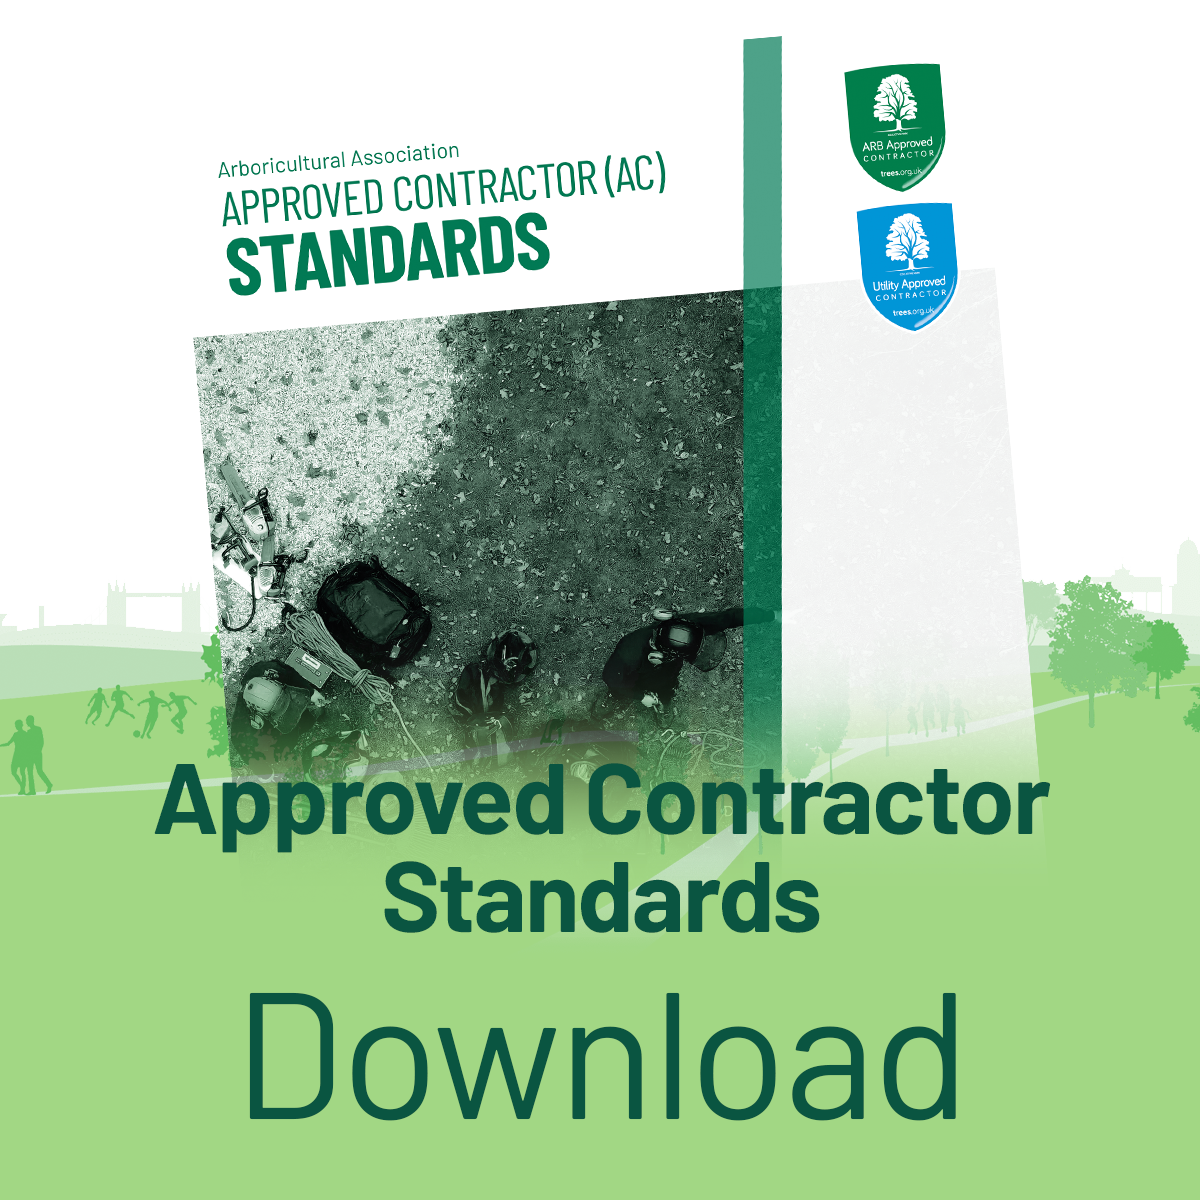 Click here to download the standards